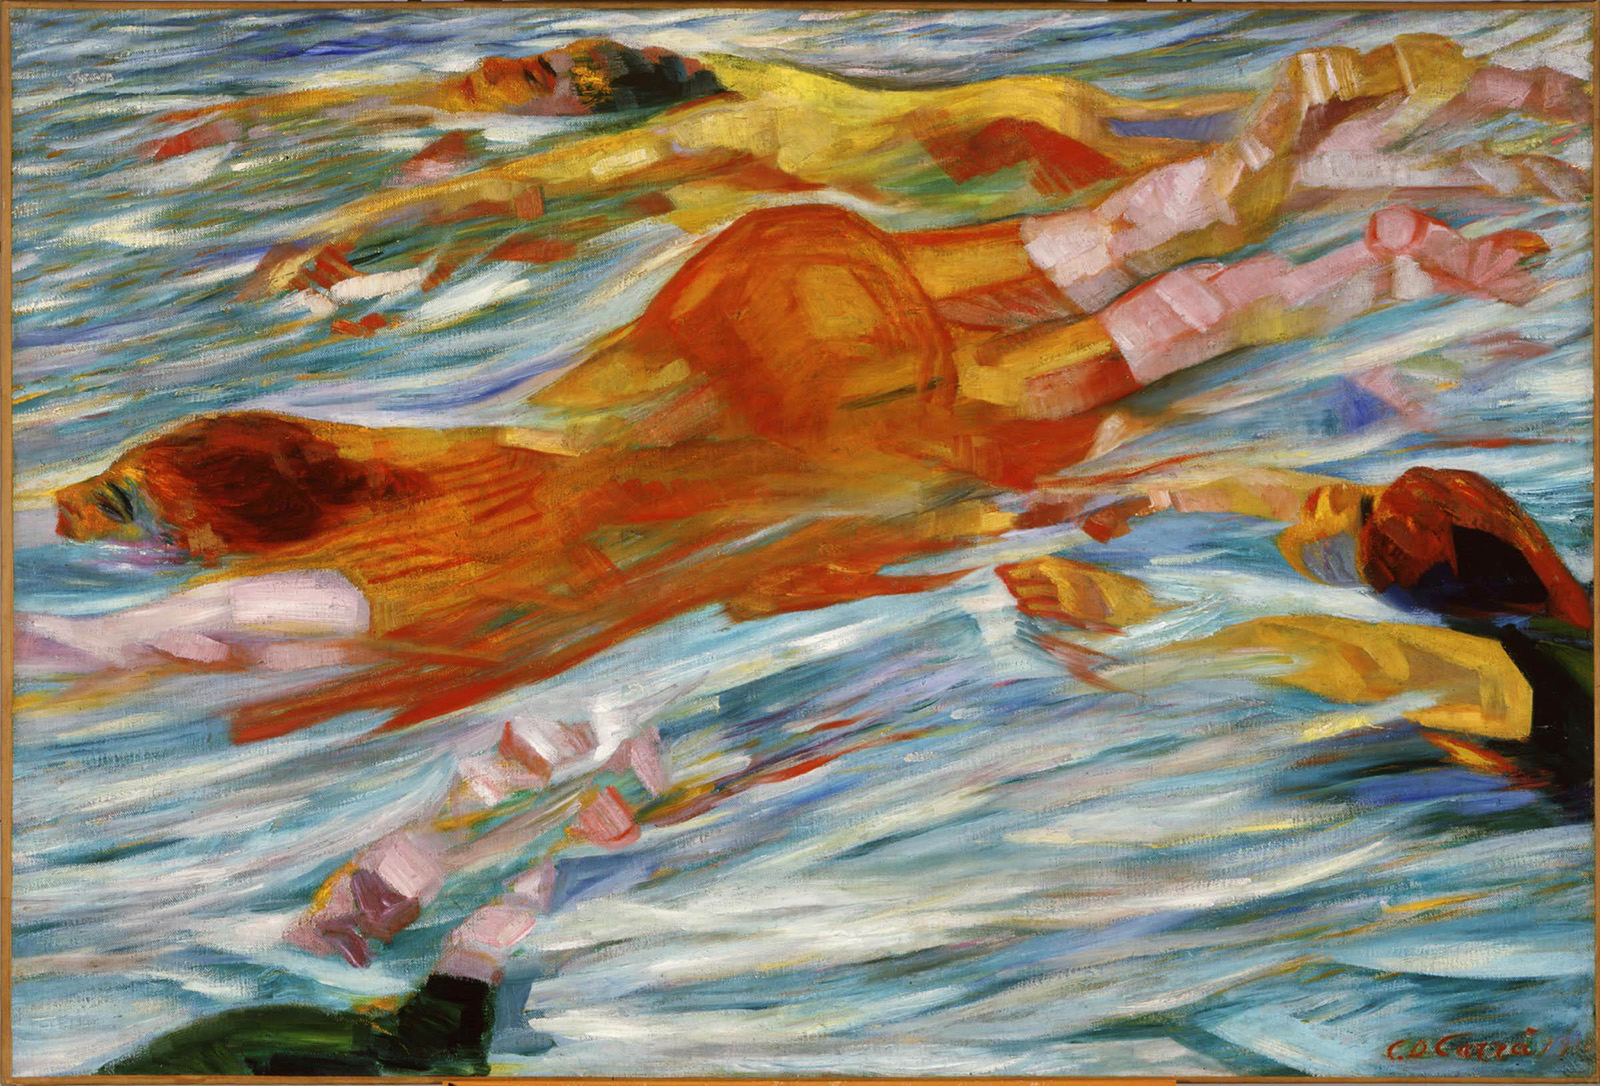 Painting of people swimming